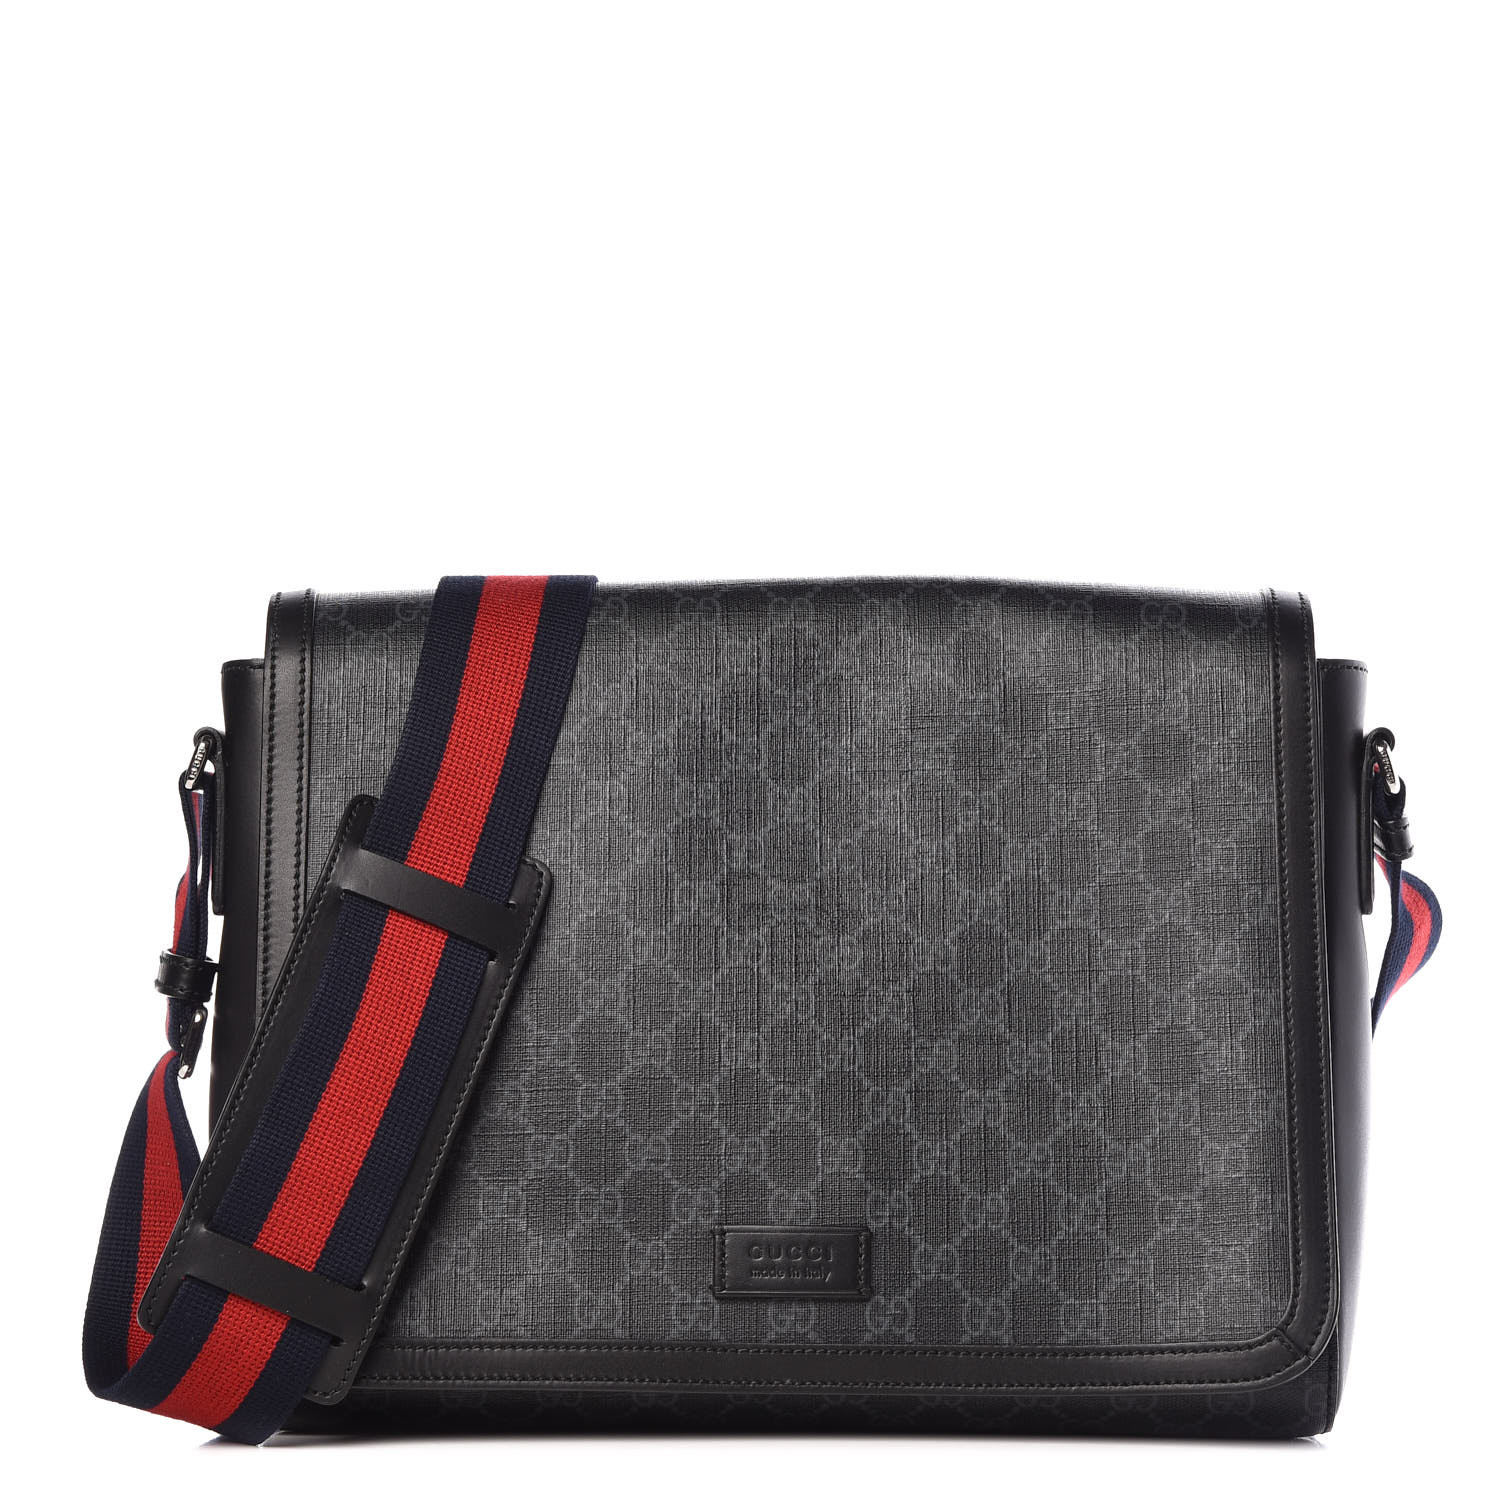 gucci messenger bag with flap